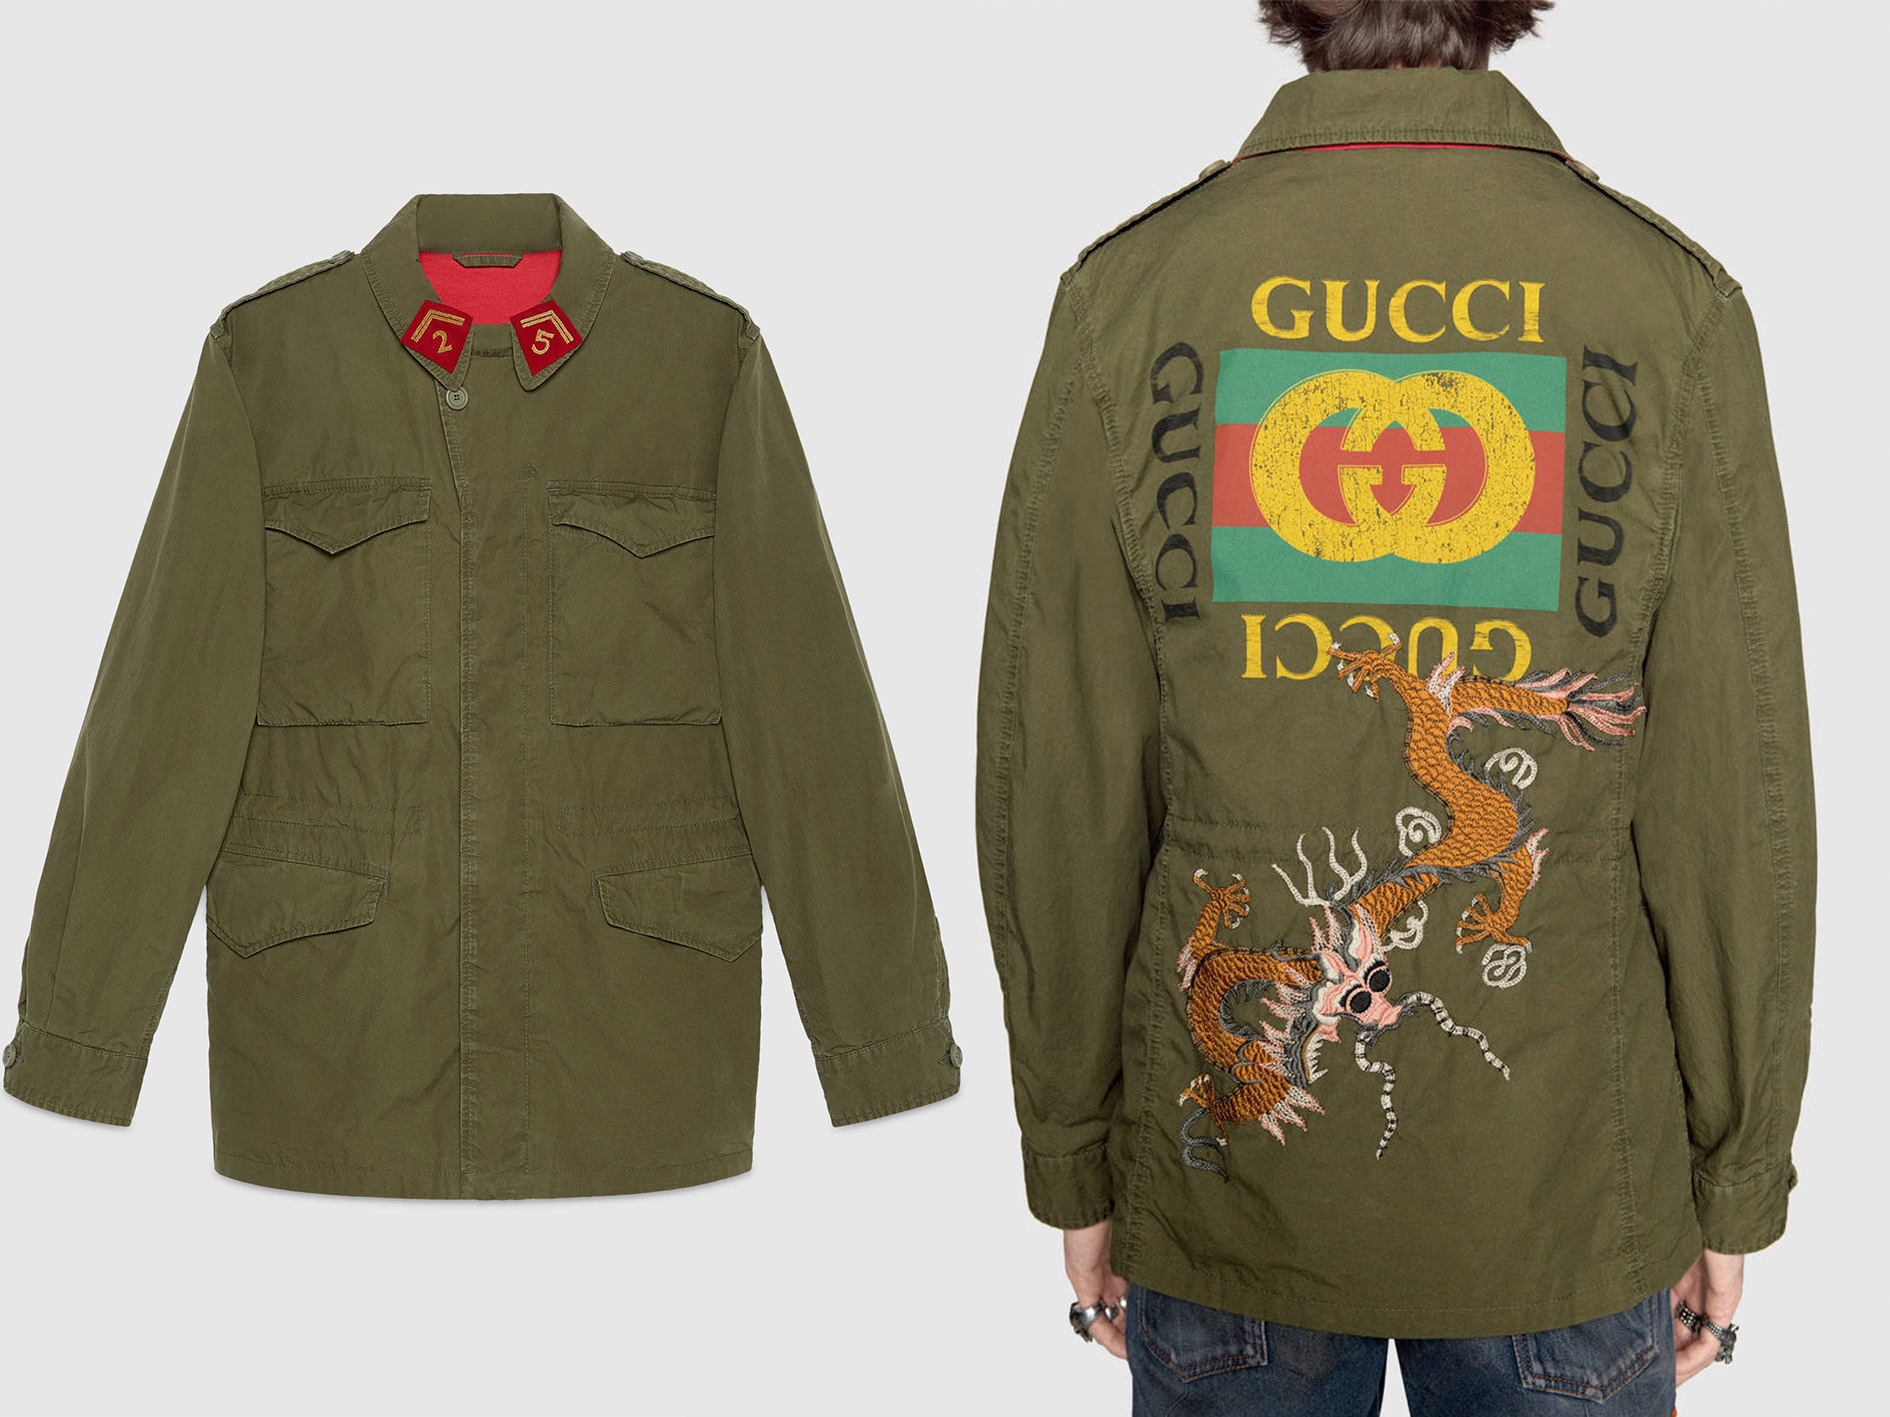 Gucci is collaborating with Angelica Hicks for a T-shirt collection